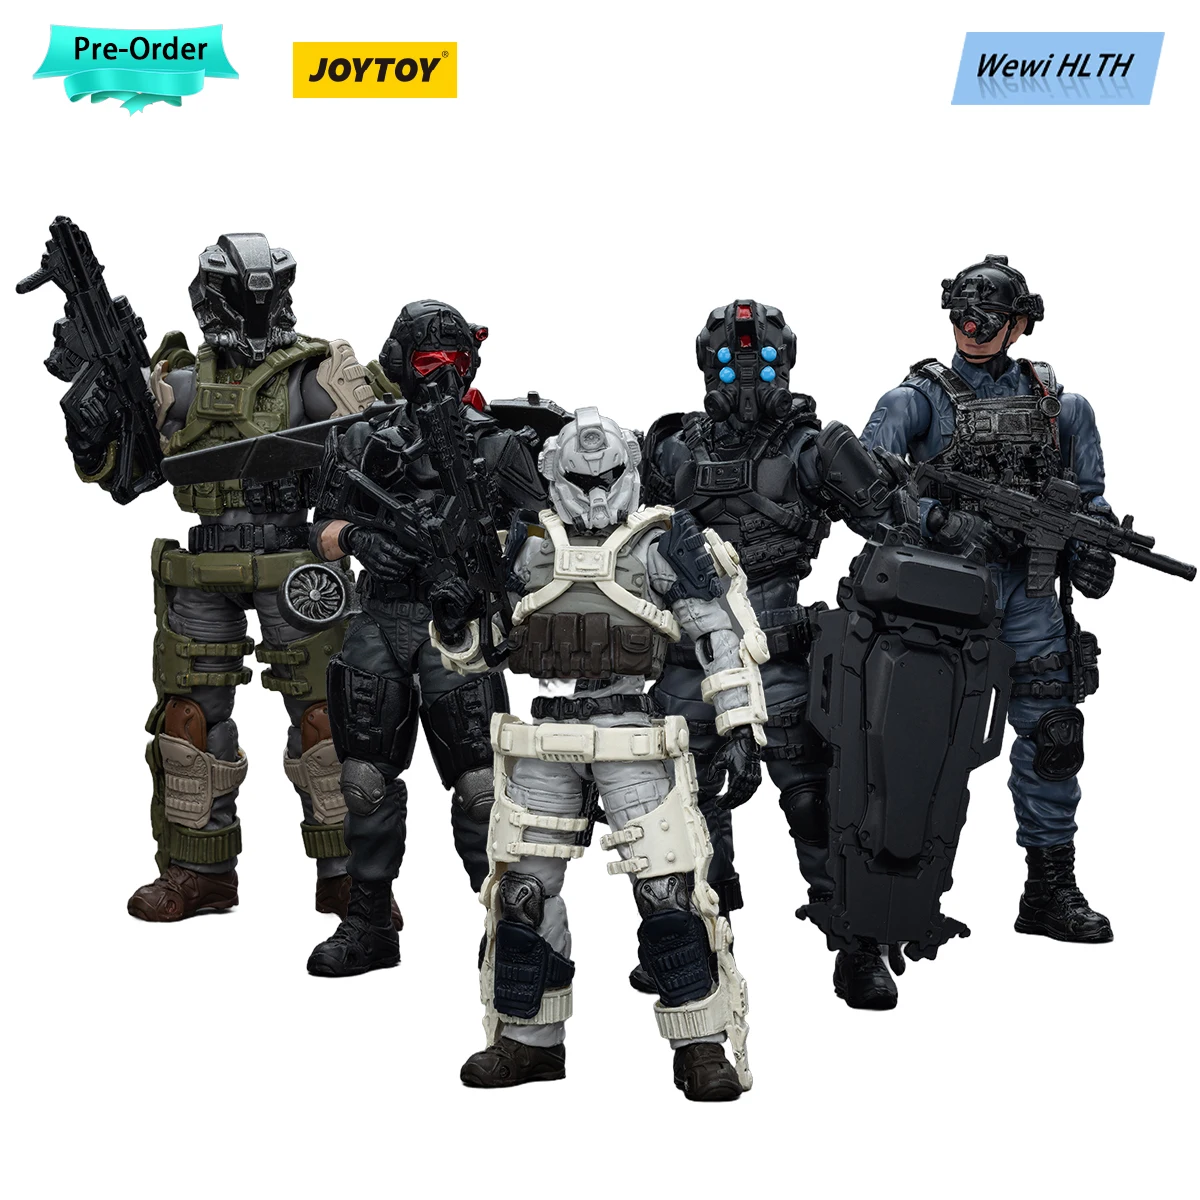 

[Pre-Order] JOYTOY Action Figure Yearly Army Builder Promotion Pack 32-36 Collection Model Perfect Gift for Teens & obbyists